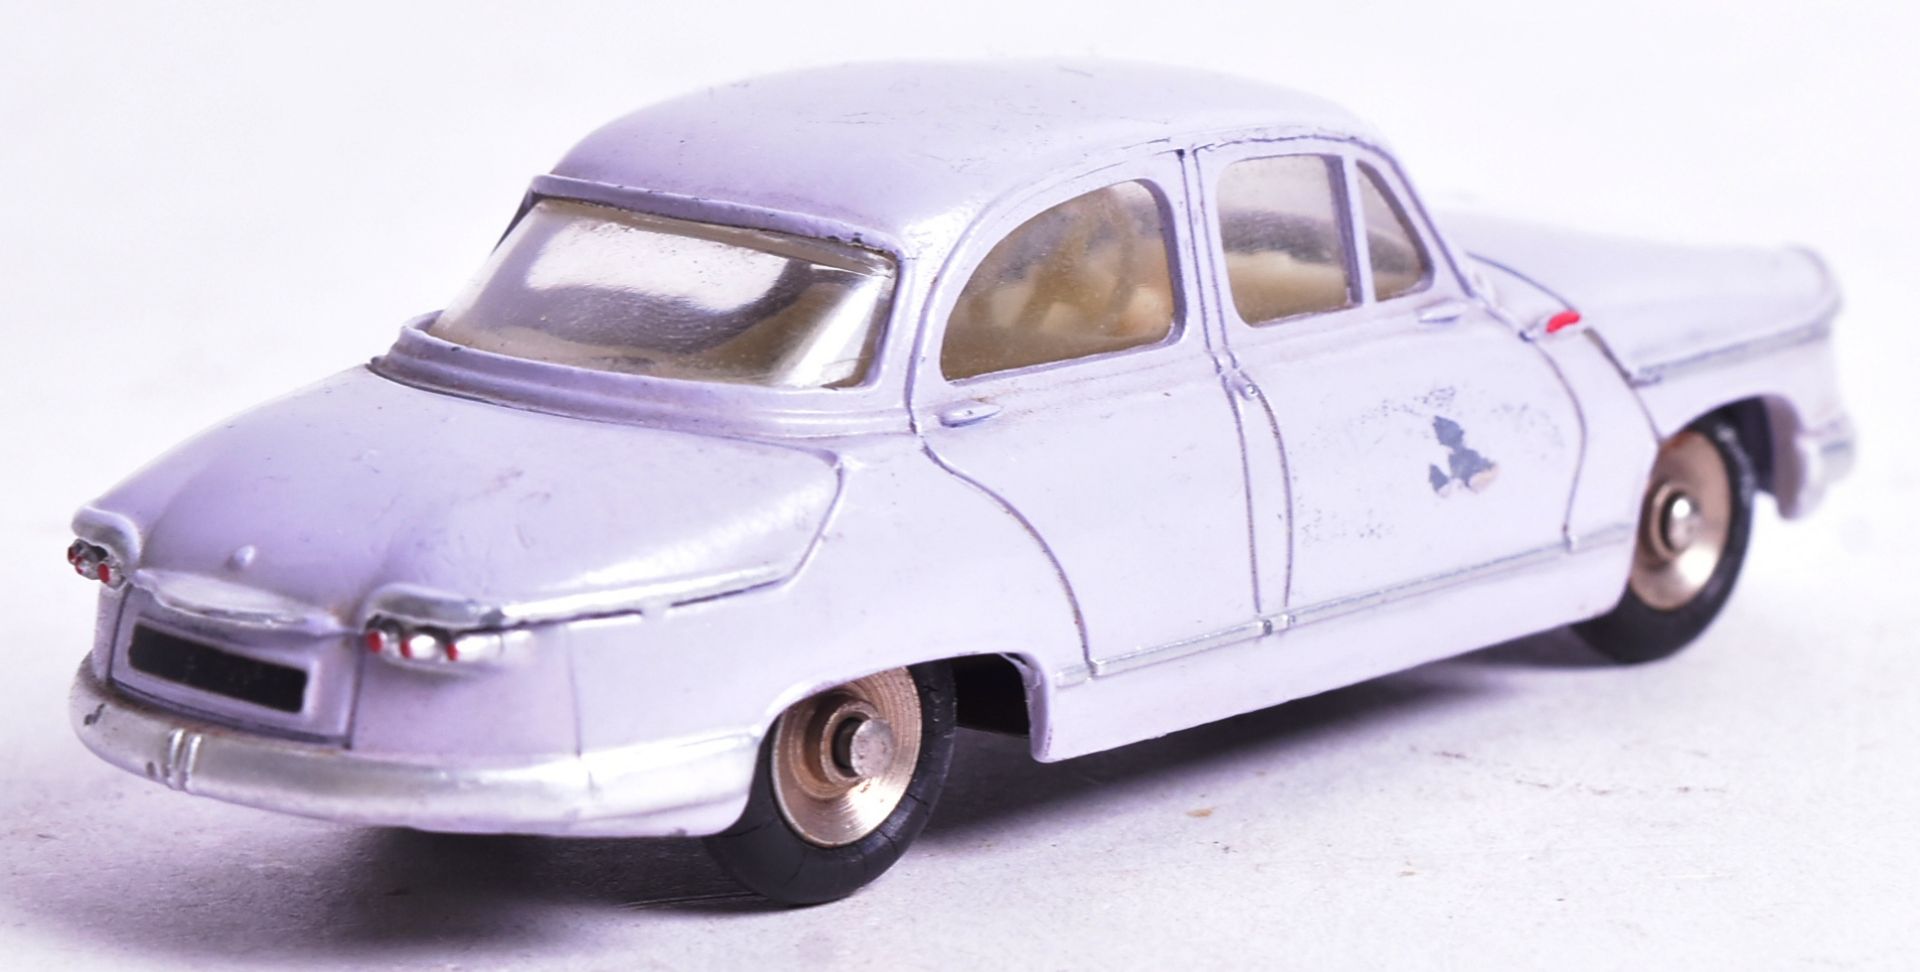 DIECAST - FRENCH DINKY TOYS - PANHARD PL 17 - Image 3 of 5